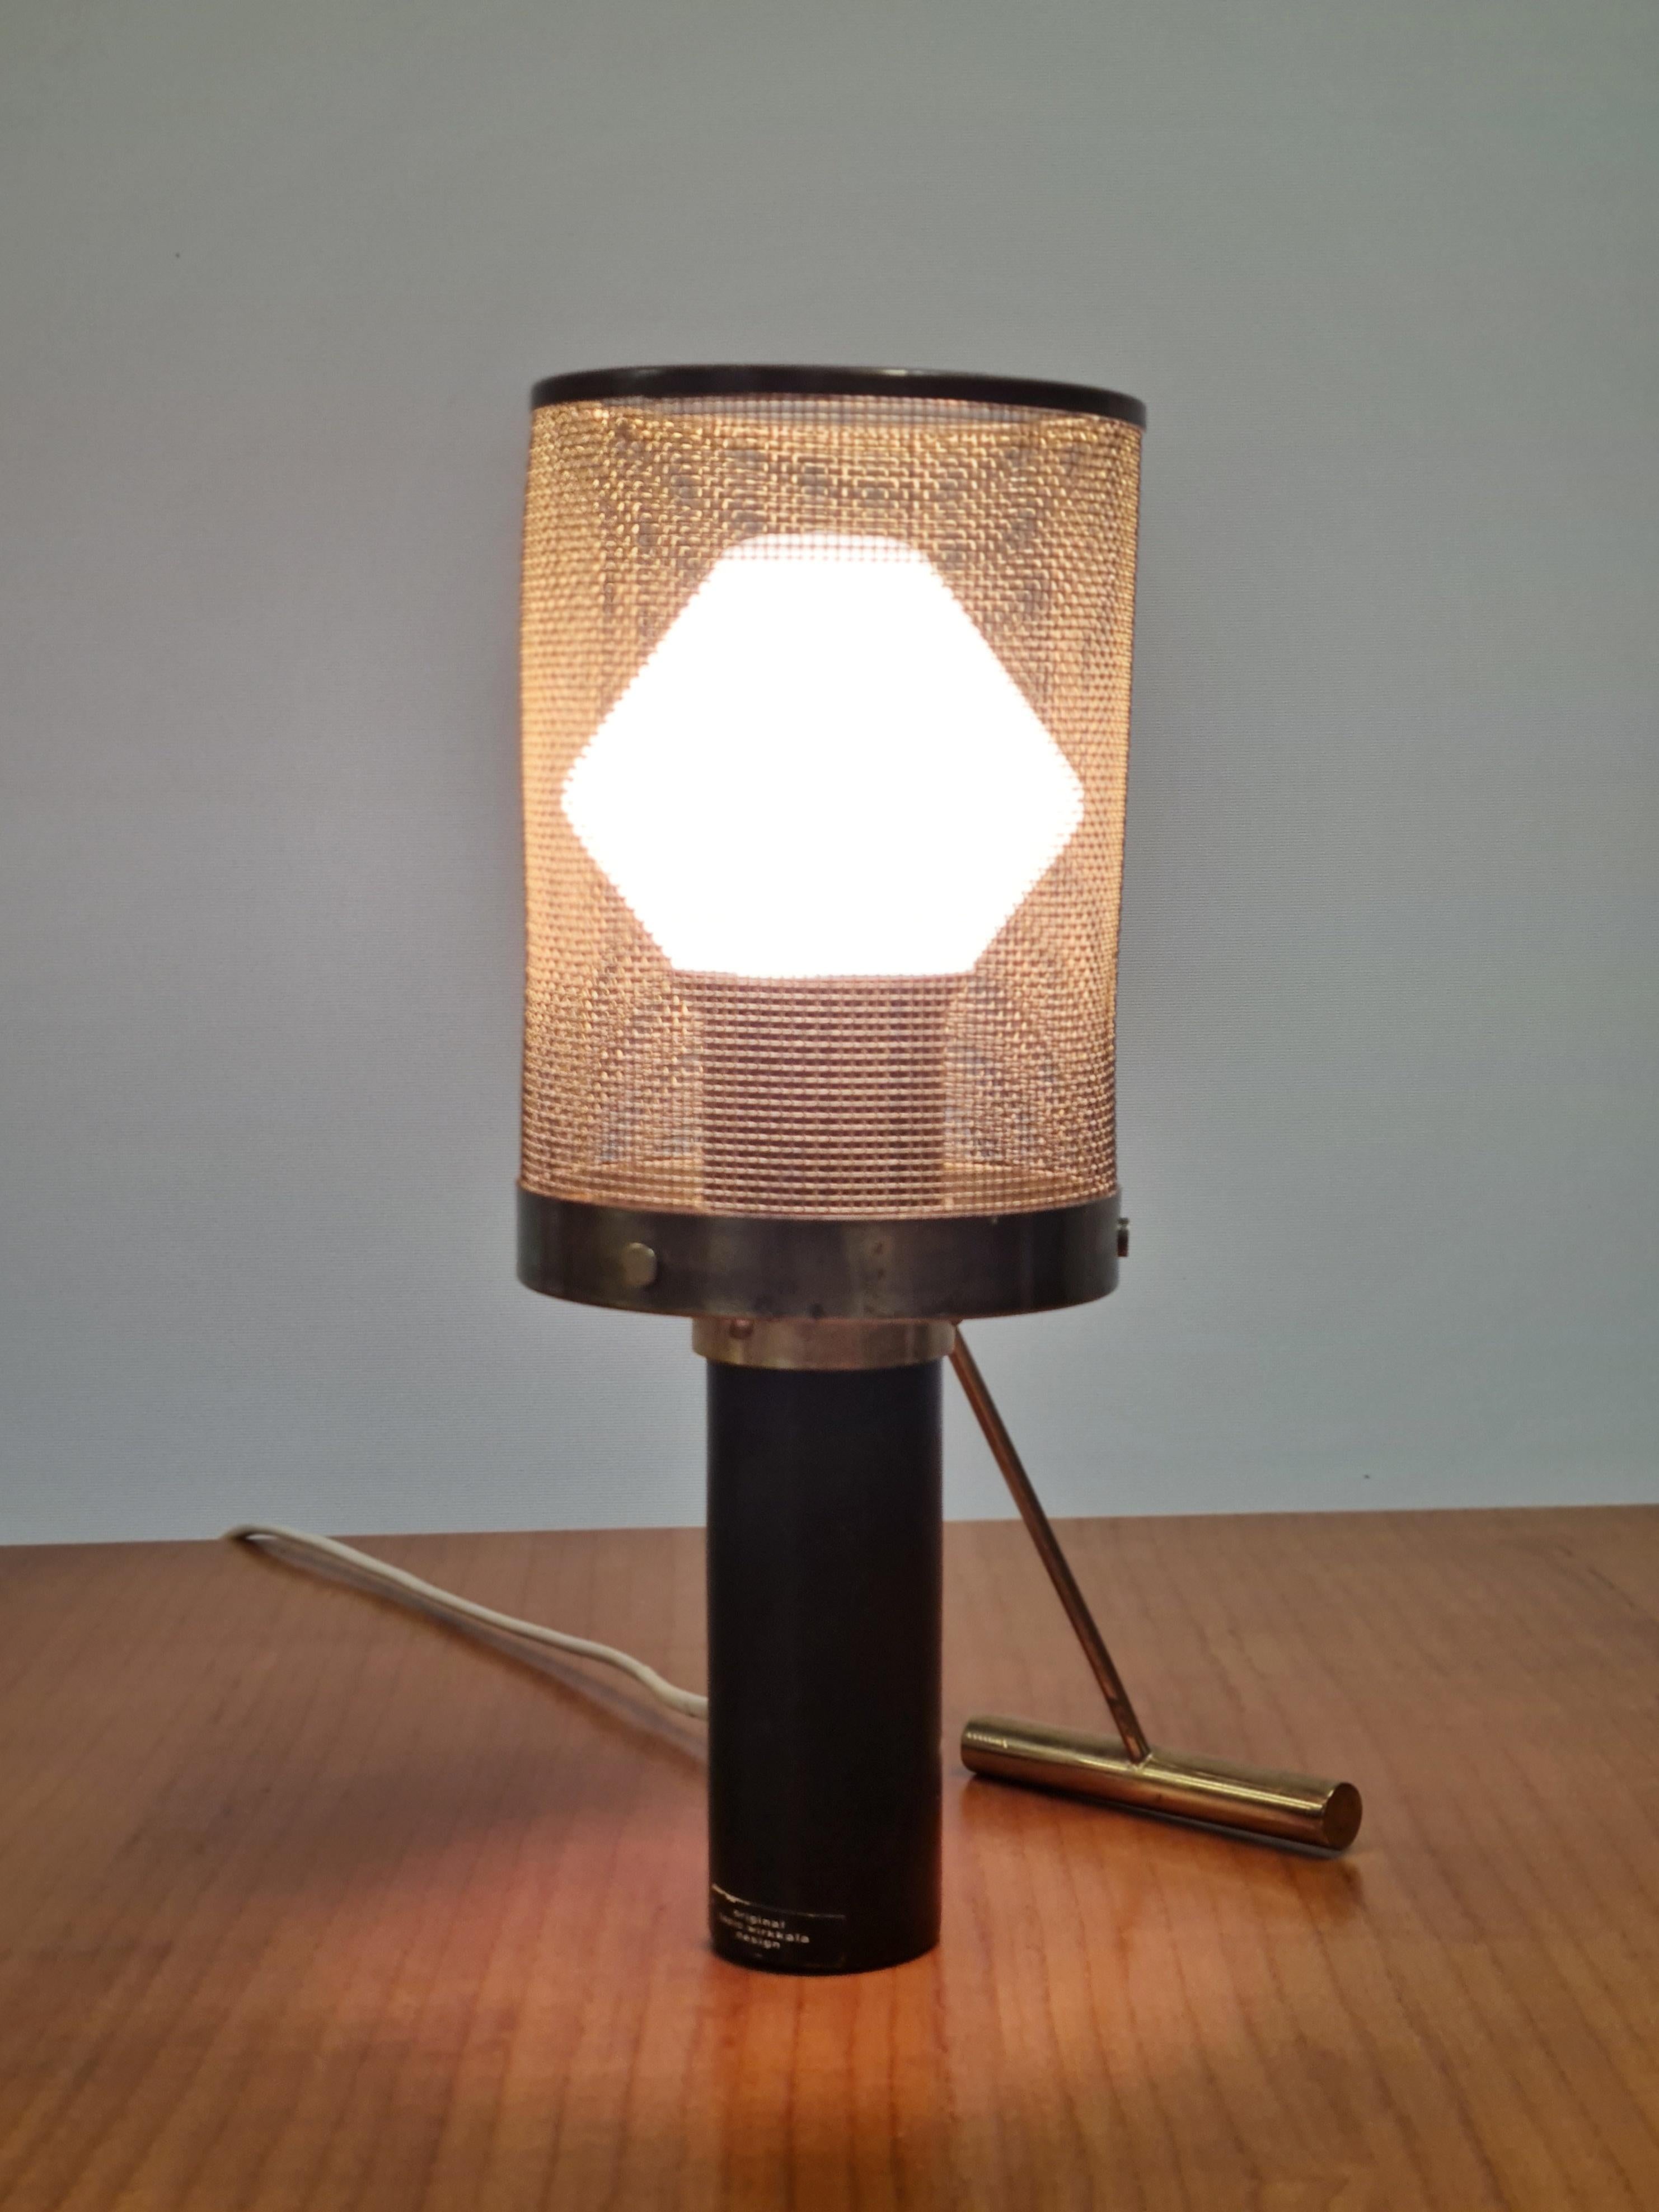 This bijou and elegant table lamp model K11-81  designed by Tapio Wirkkala, is hard to come by, which makes this piece a great addition to any collection. It objectifies Wirkkala's superb understanding of geometry and his talent in conveying it with